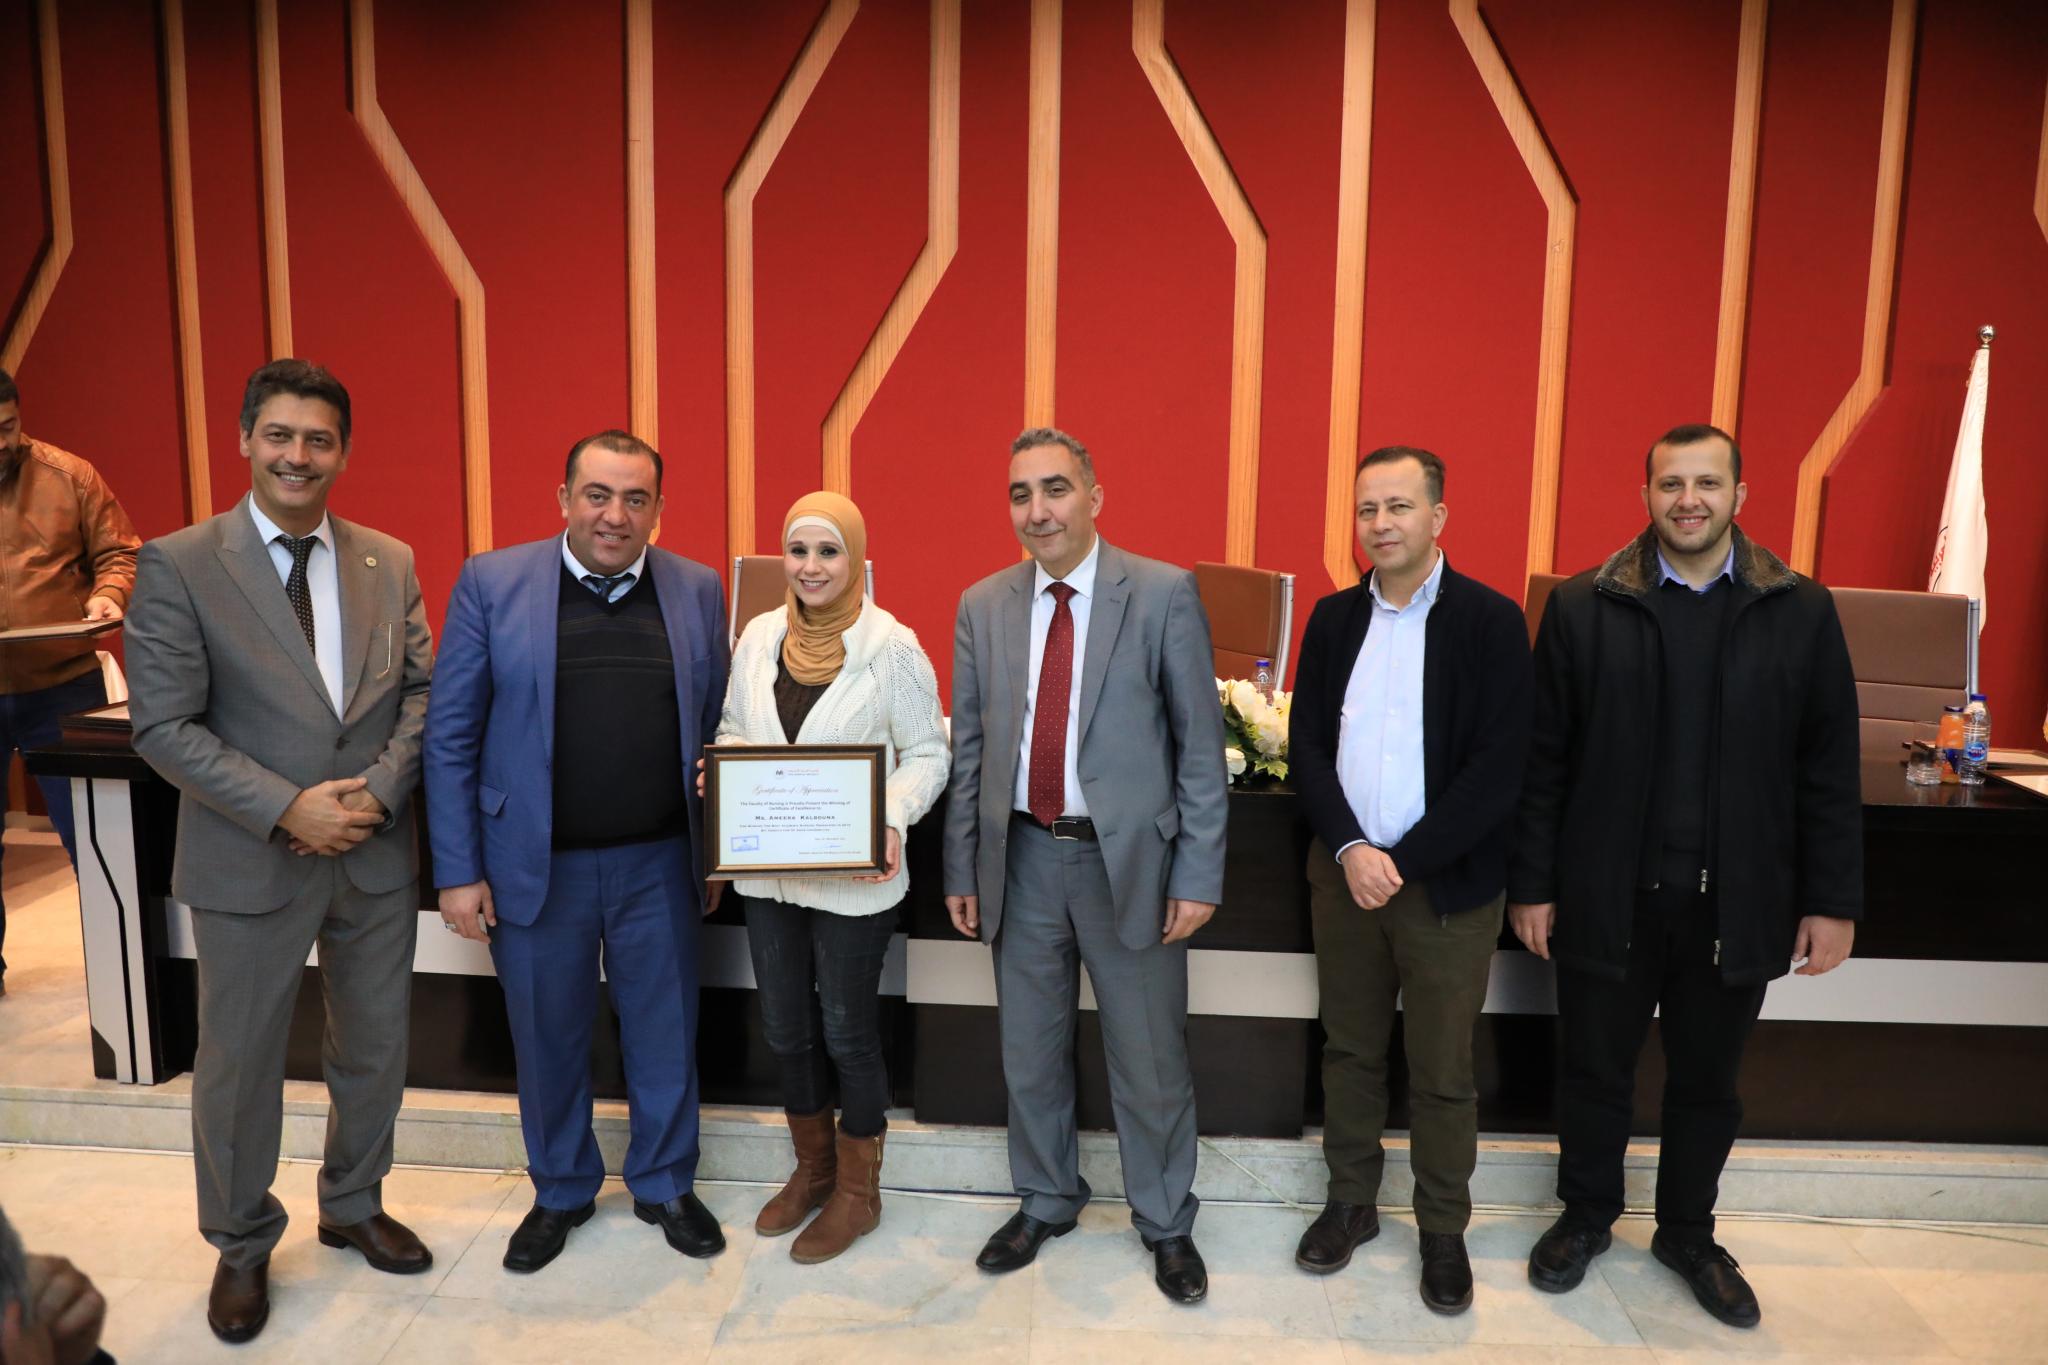 The honoring of the faculty and staff members of the Faculty of Nursing and the Faculty of Allied Medical Sciences for their efforts and hard work